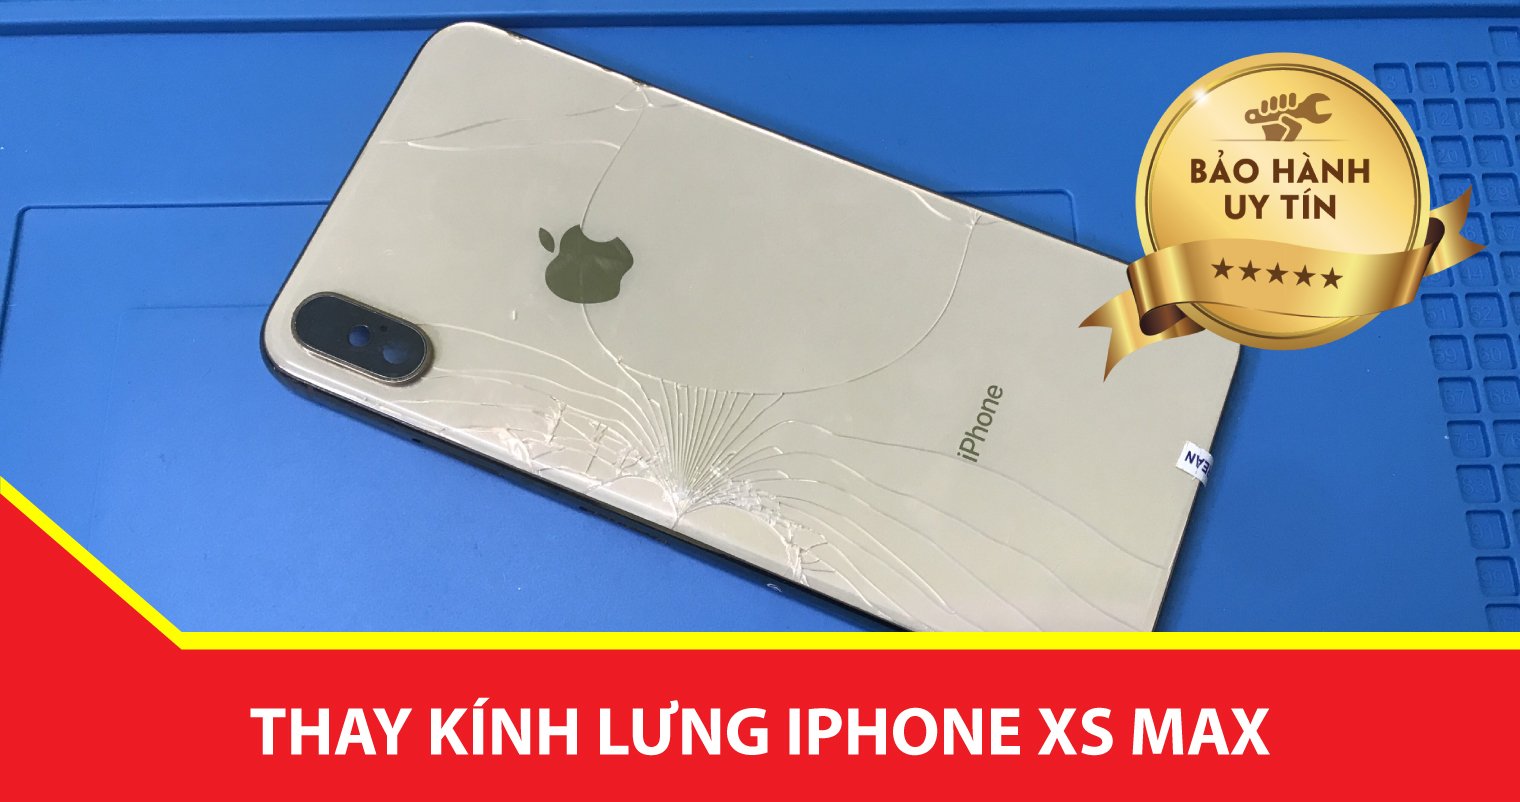 thay kinh lung dien thoai iphone xs max